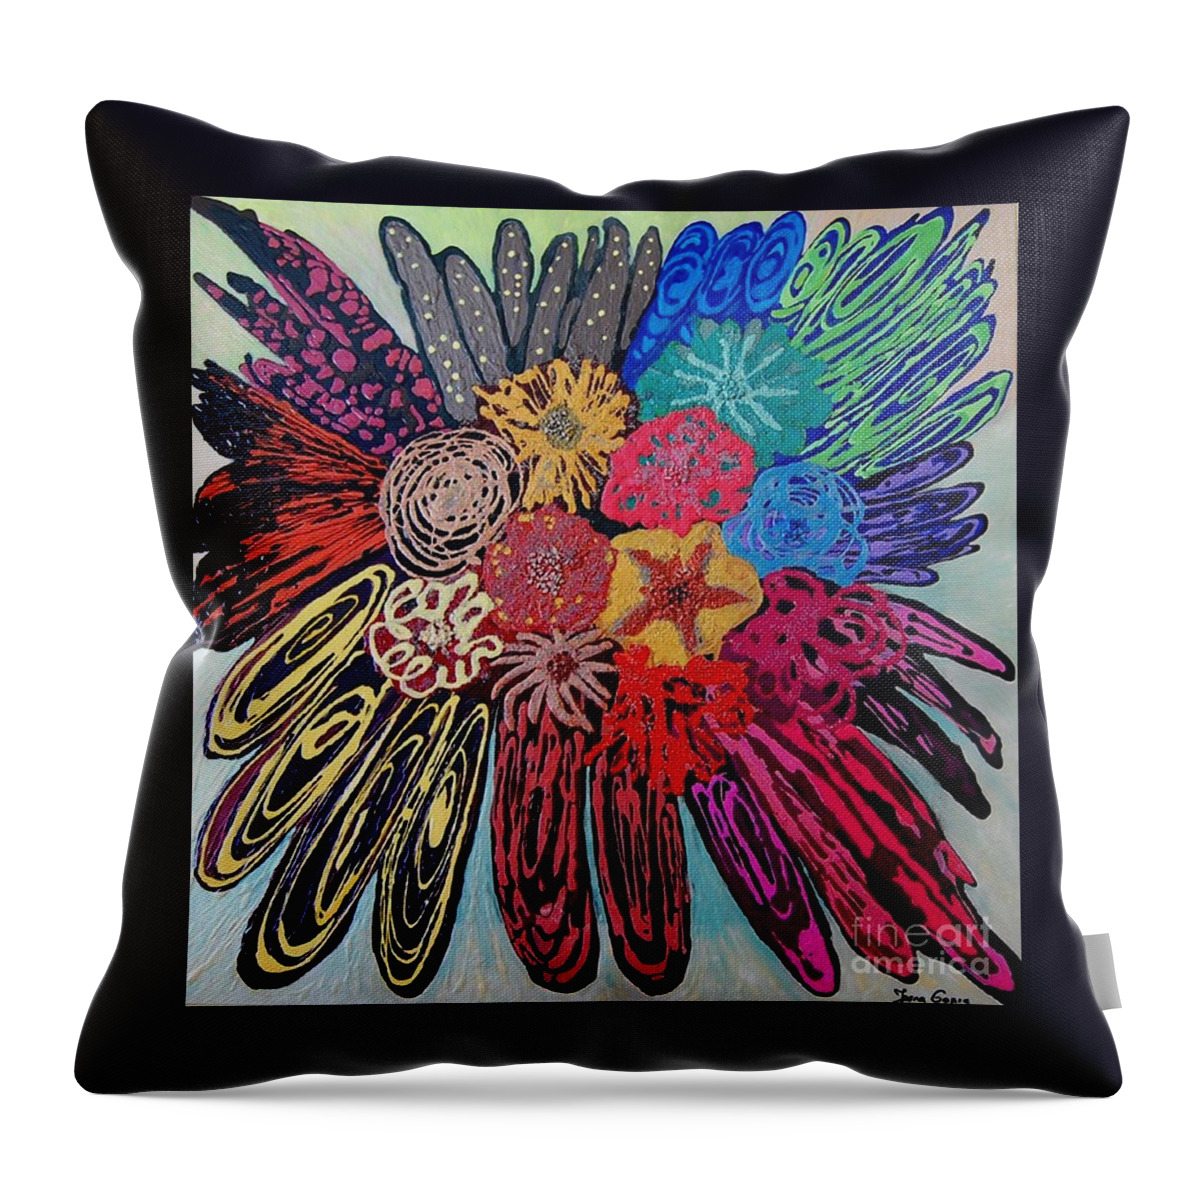 Abstract Throw Pillow featuring the painting Flowers burst by Jasna Gopic by Jasna Gopic